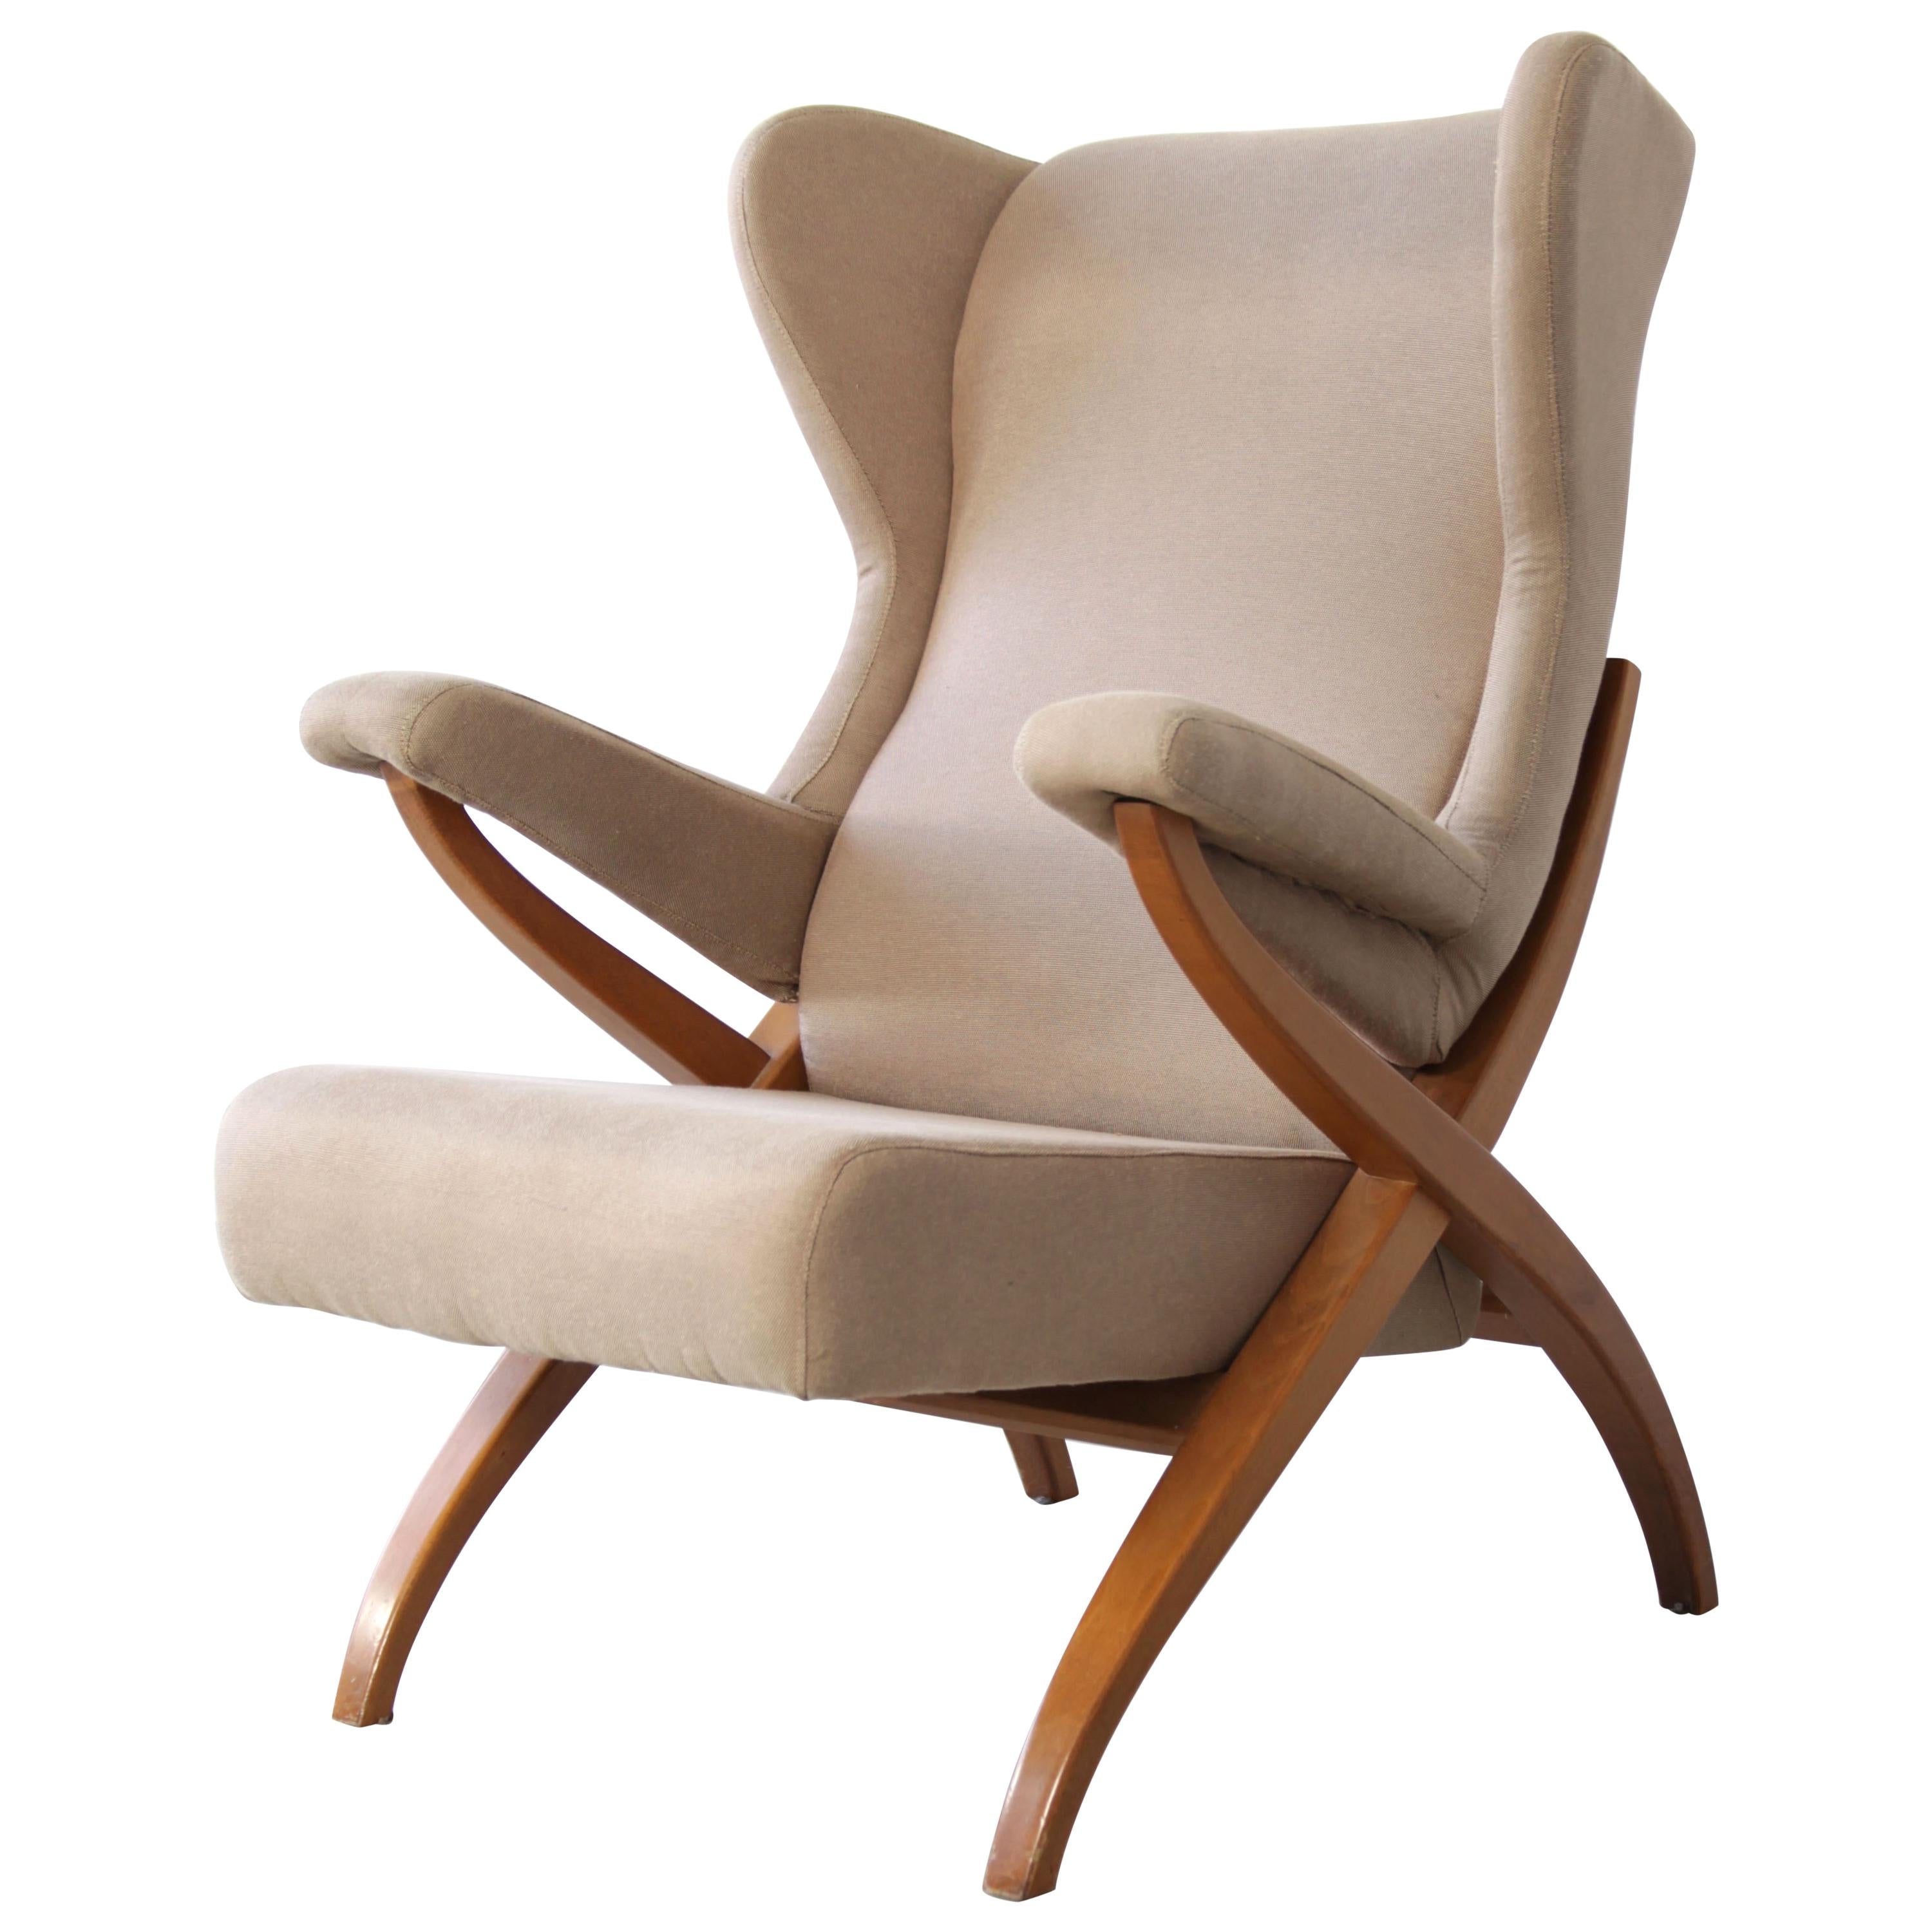 Armchair "Fiorenza" designed by Franco Albini in 1952 for Arflex, Italy. For Sale